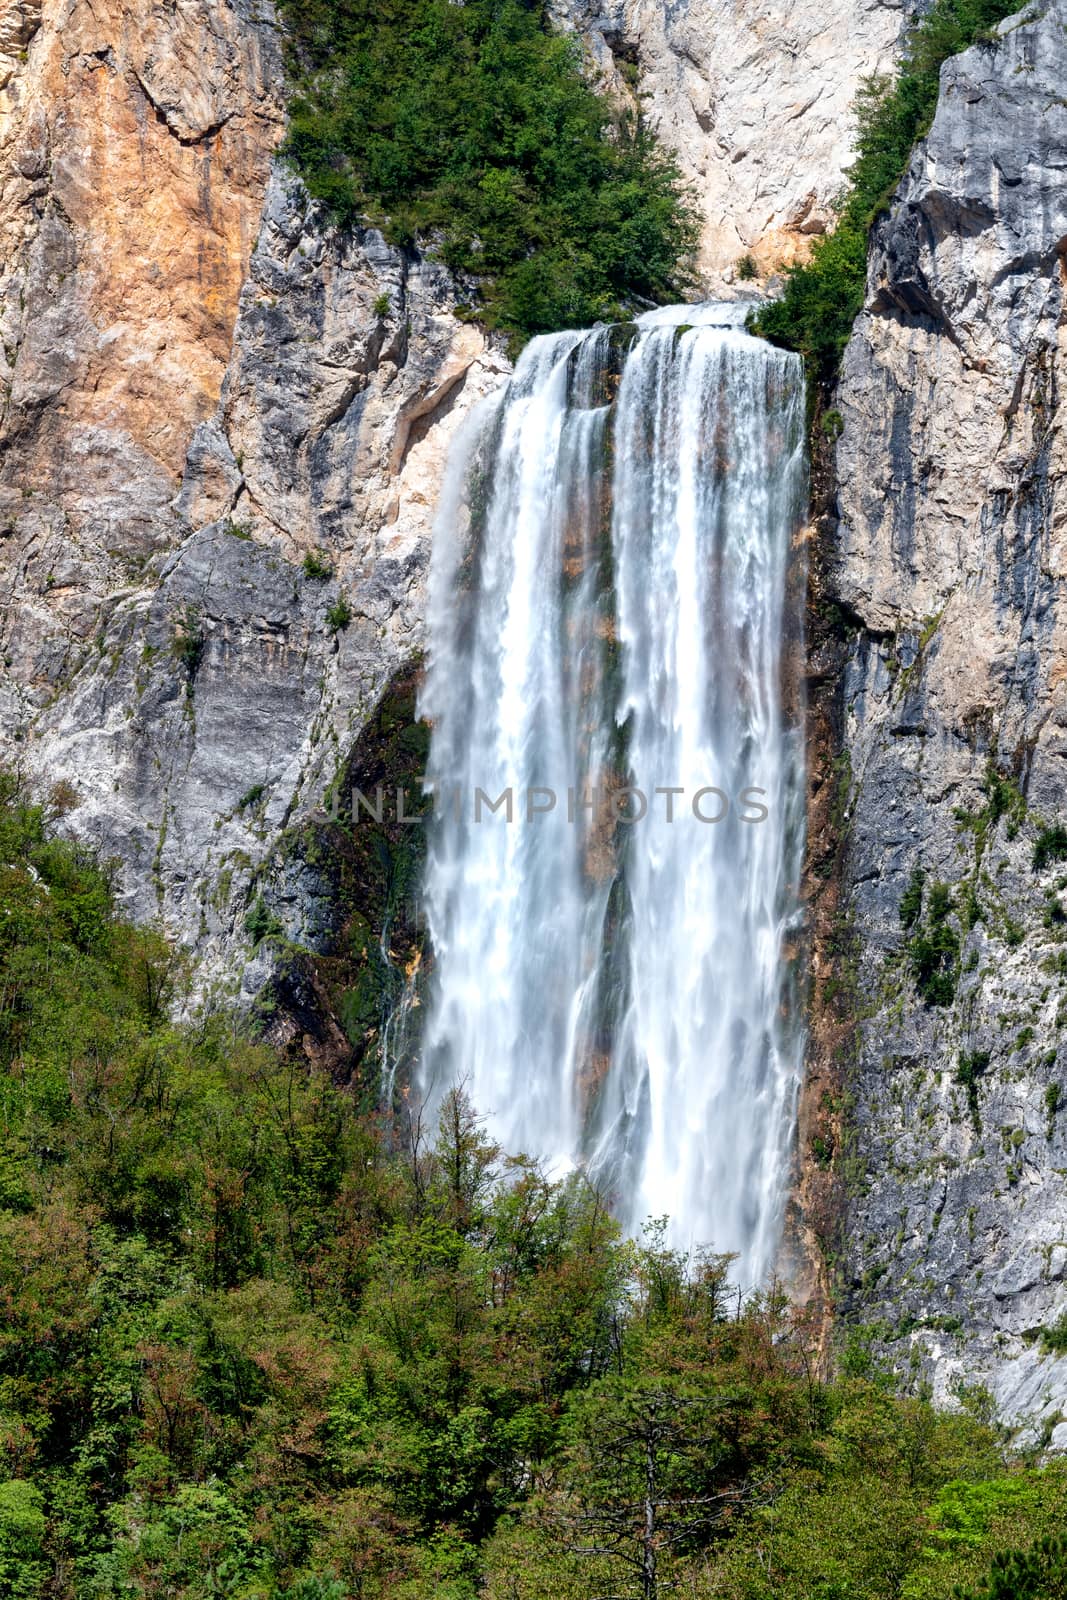 Famous slovenian waterfall Boka in Julian Alps in Triglav National park, Slovenia is one of the highest waterfalls in european Alps with 106m in height, rare view from far, vertical, close zoom